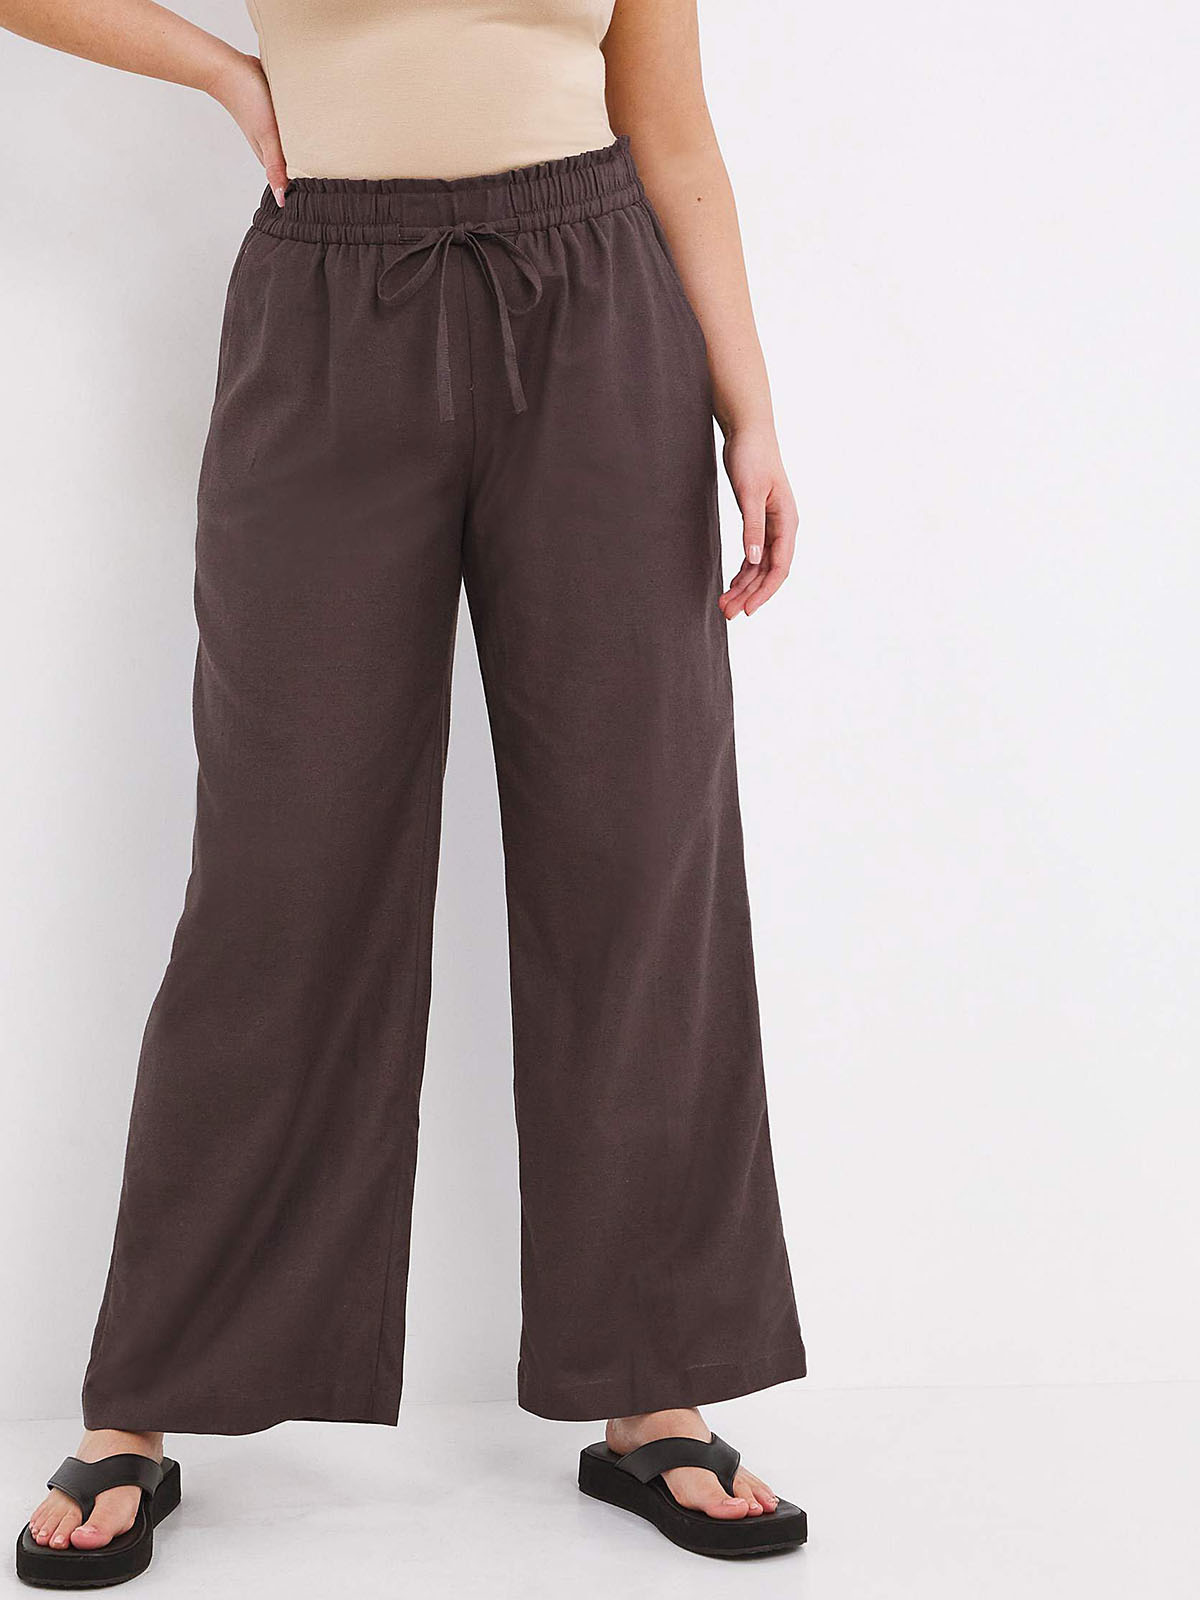 Urban Threads linen blend wide leg trousers coord in chocolate brown  ASOS